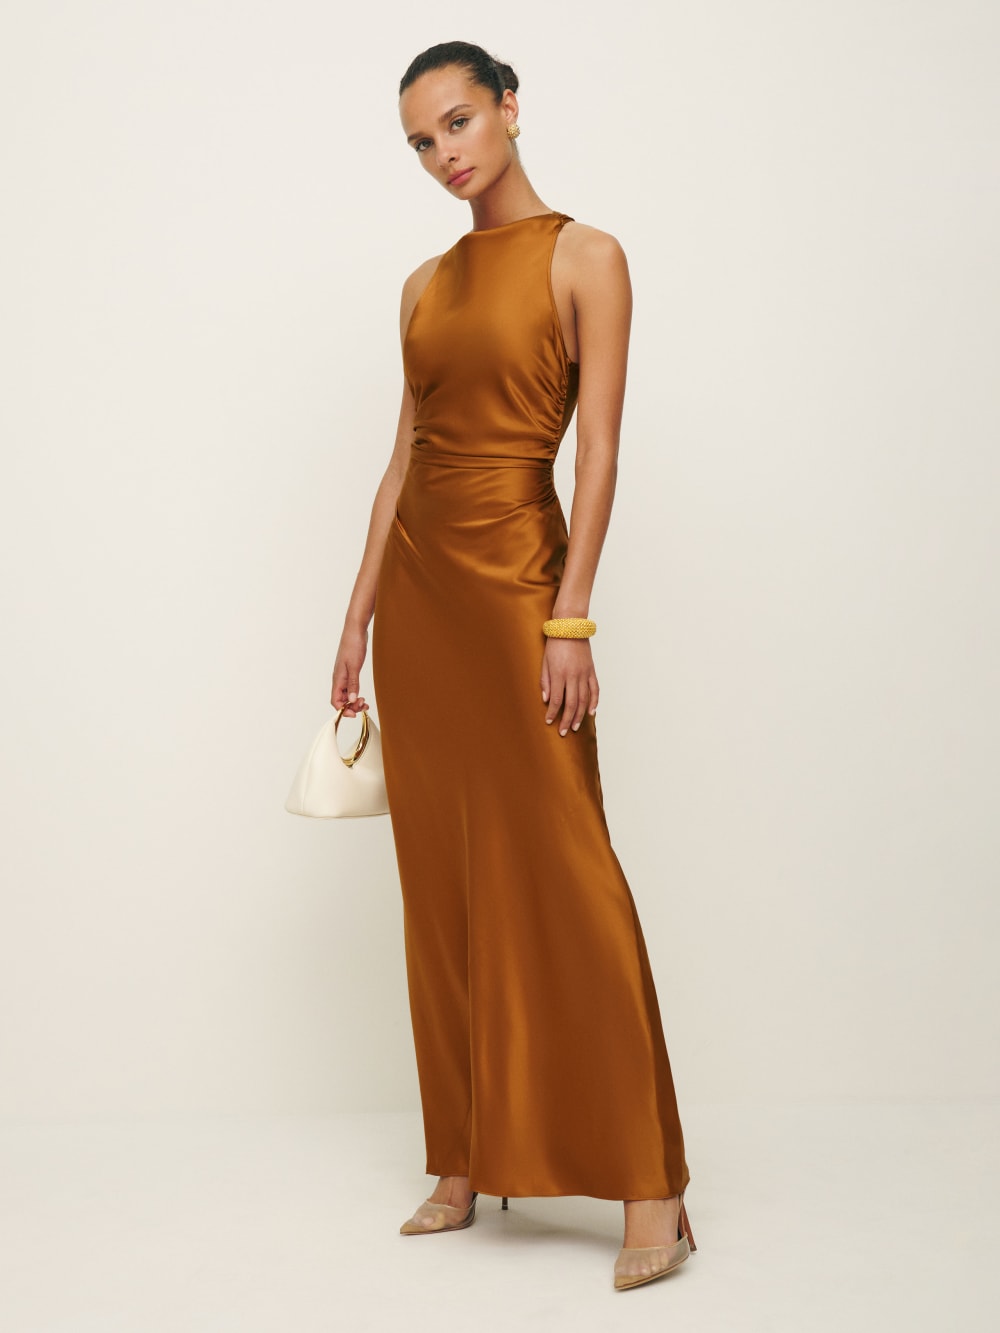 2024 wedding guest outfits - Reformation Anaiis Silk maxi Dress in copper has a high neck, side ruching details and cross back detail. 